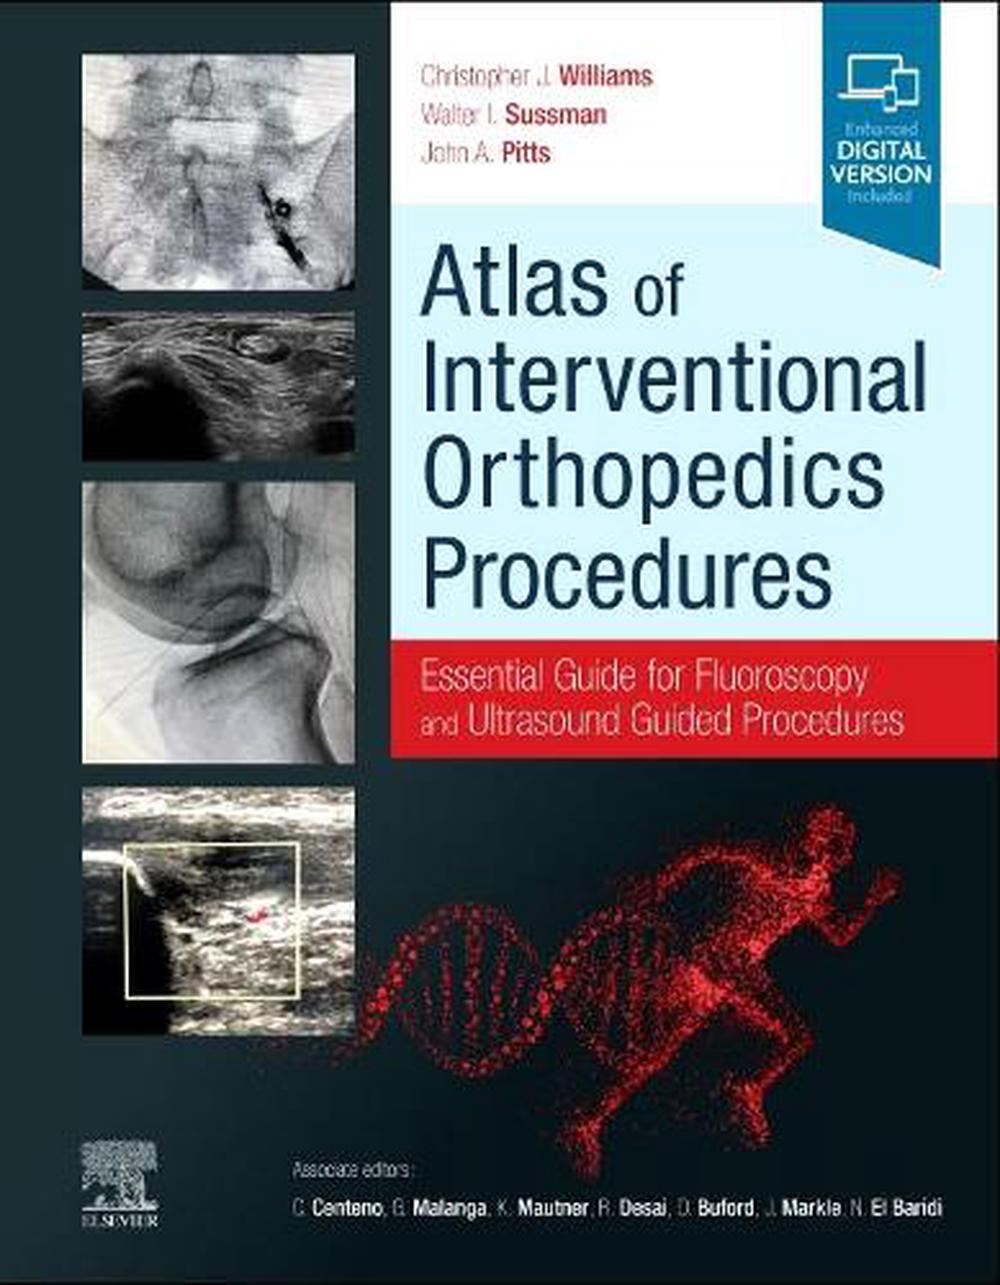 9780323755146　Atlas　Hardcover,　The　Nile　of　Interventional　J.　Christopher　Orthopedics　online　Procedures　at　by　MD　Williams,　Buy